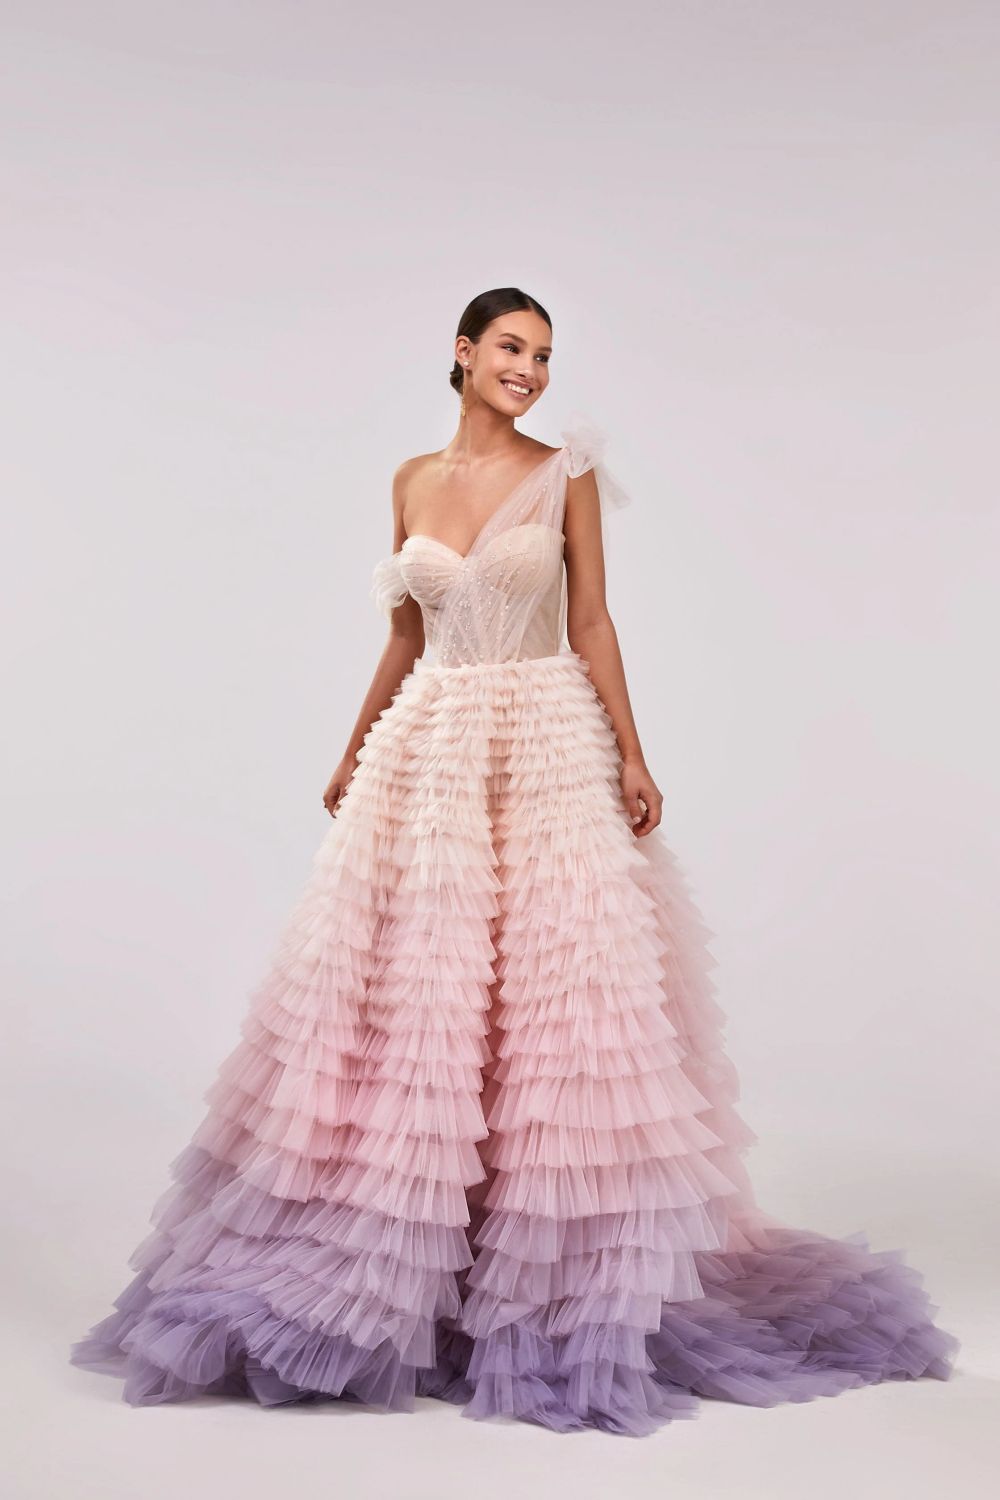 lavender wedding dress ball gown with the frill-layered blush purple ombre maxi skirt